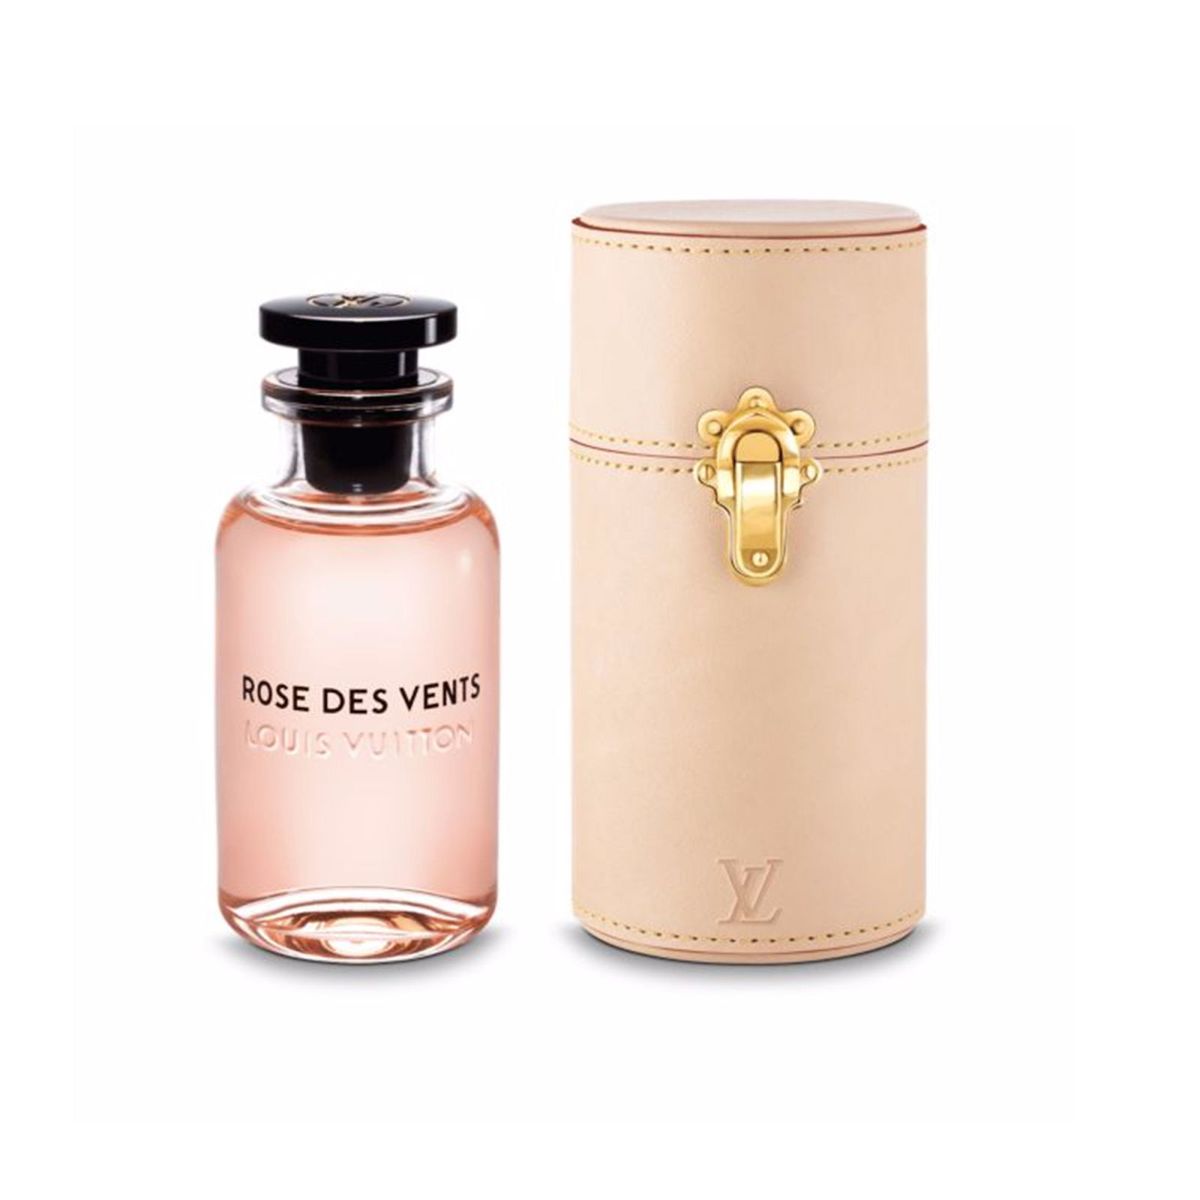 Fragrance Queen on X: Don't forget, you can refill your Louis Vuitton  perfume bottles. Take your empty bottle and they will refill it for you at  a discounted price  / X